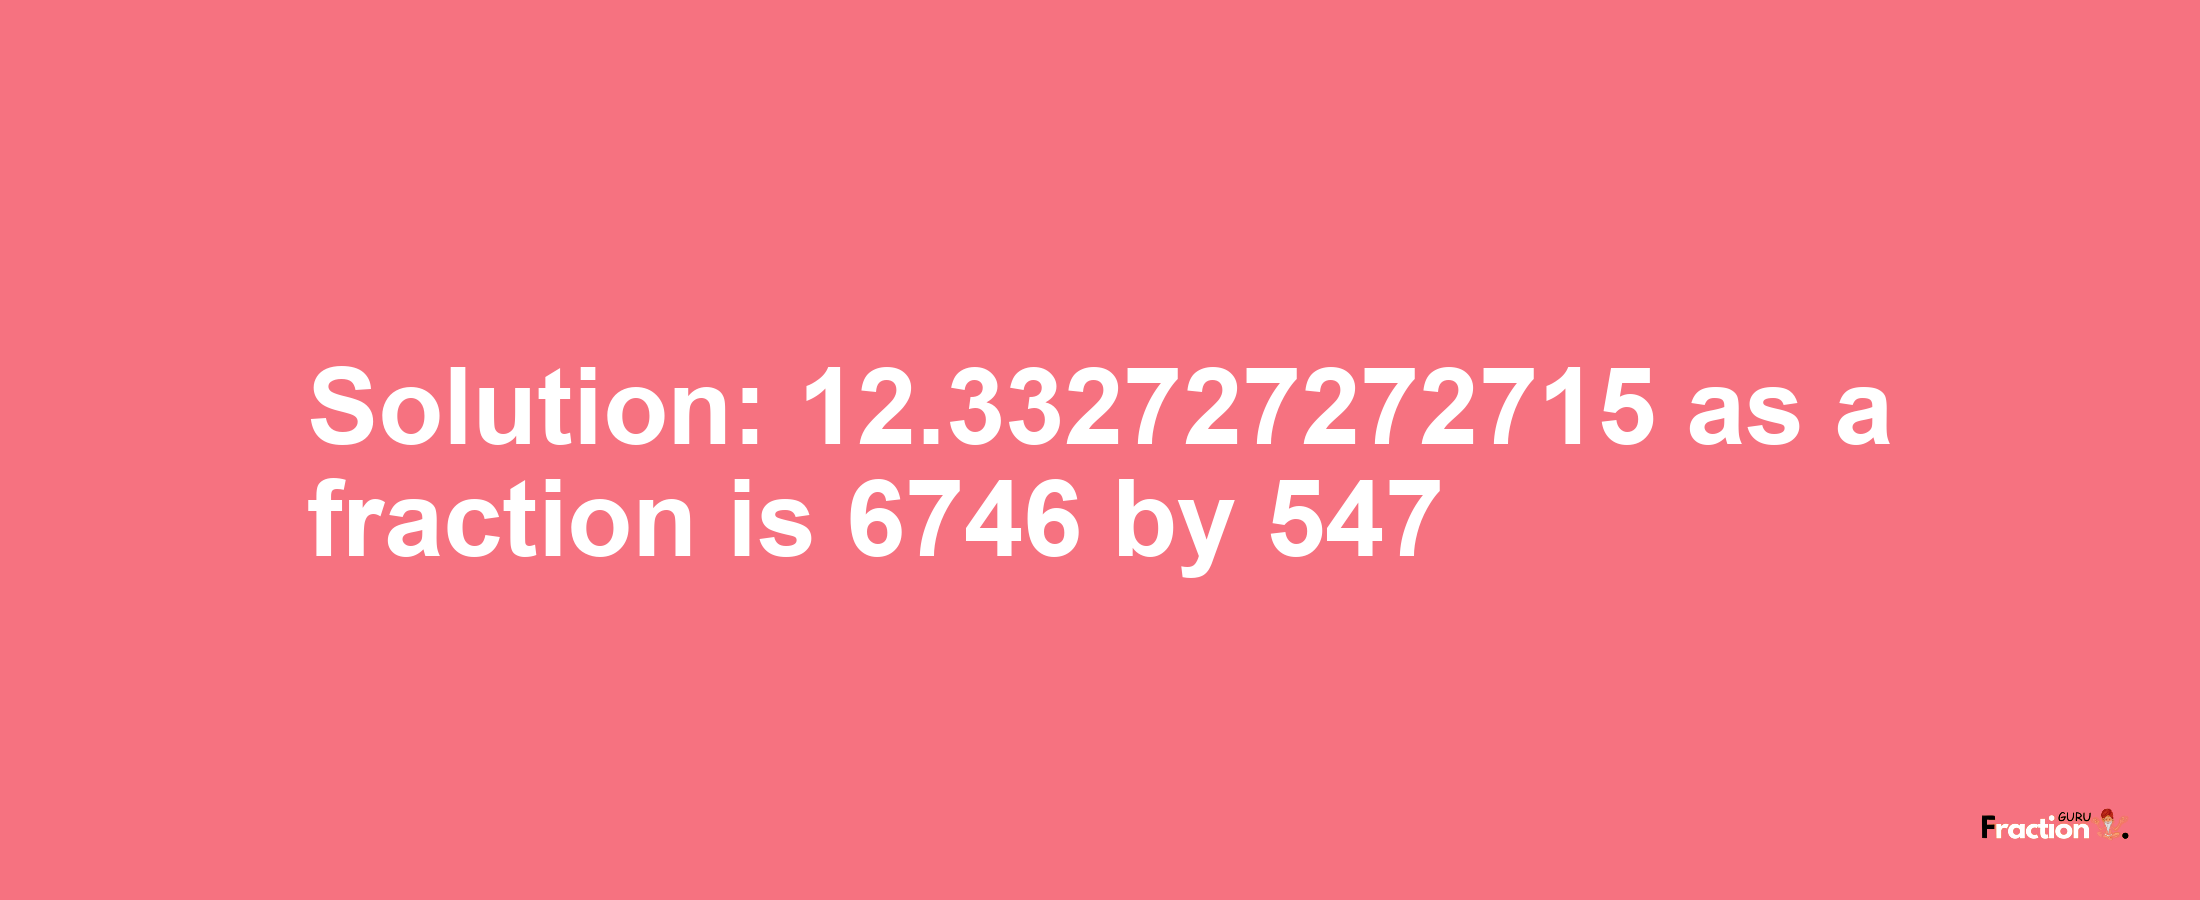 Solution:12.332727272715 as a fraction is 6746/547